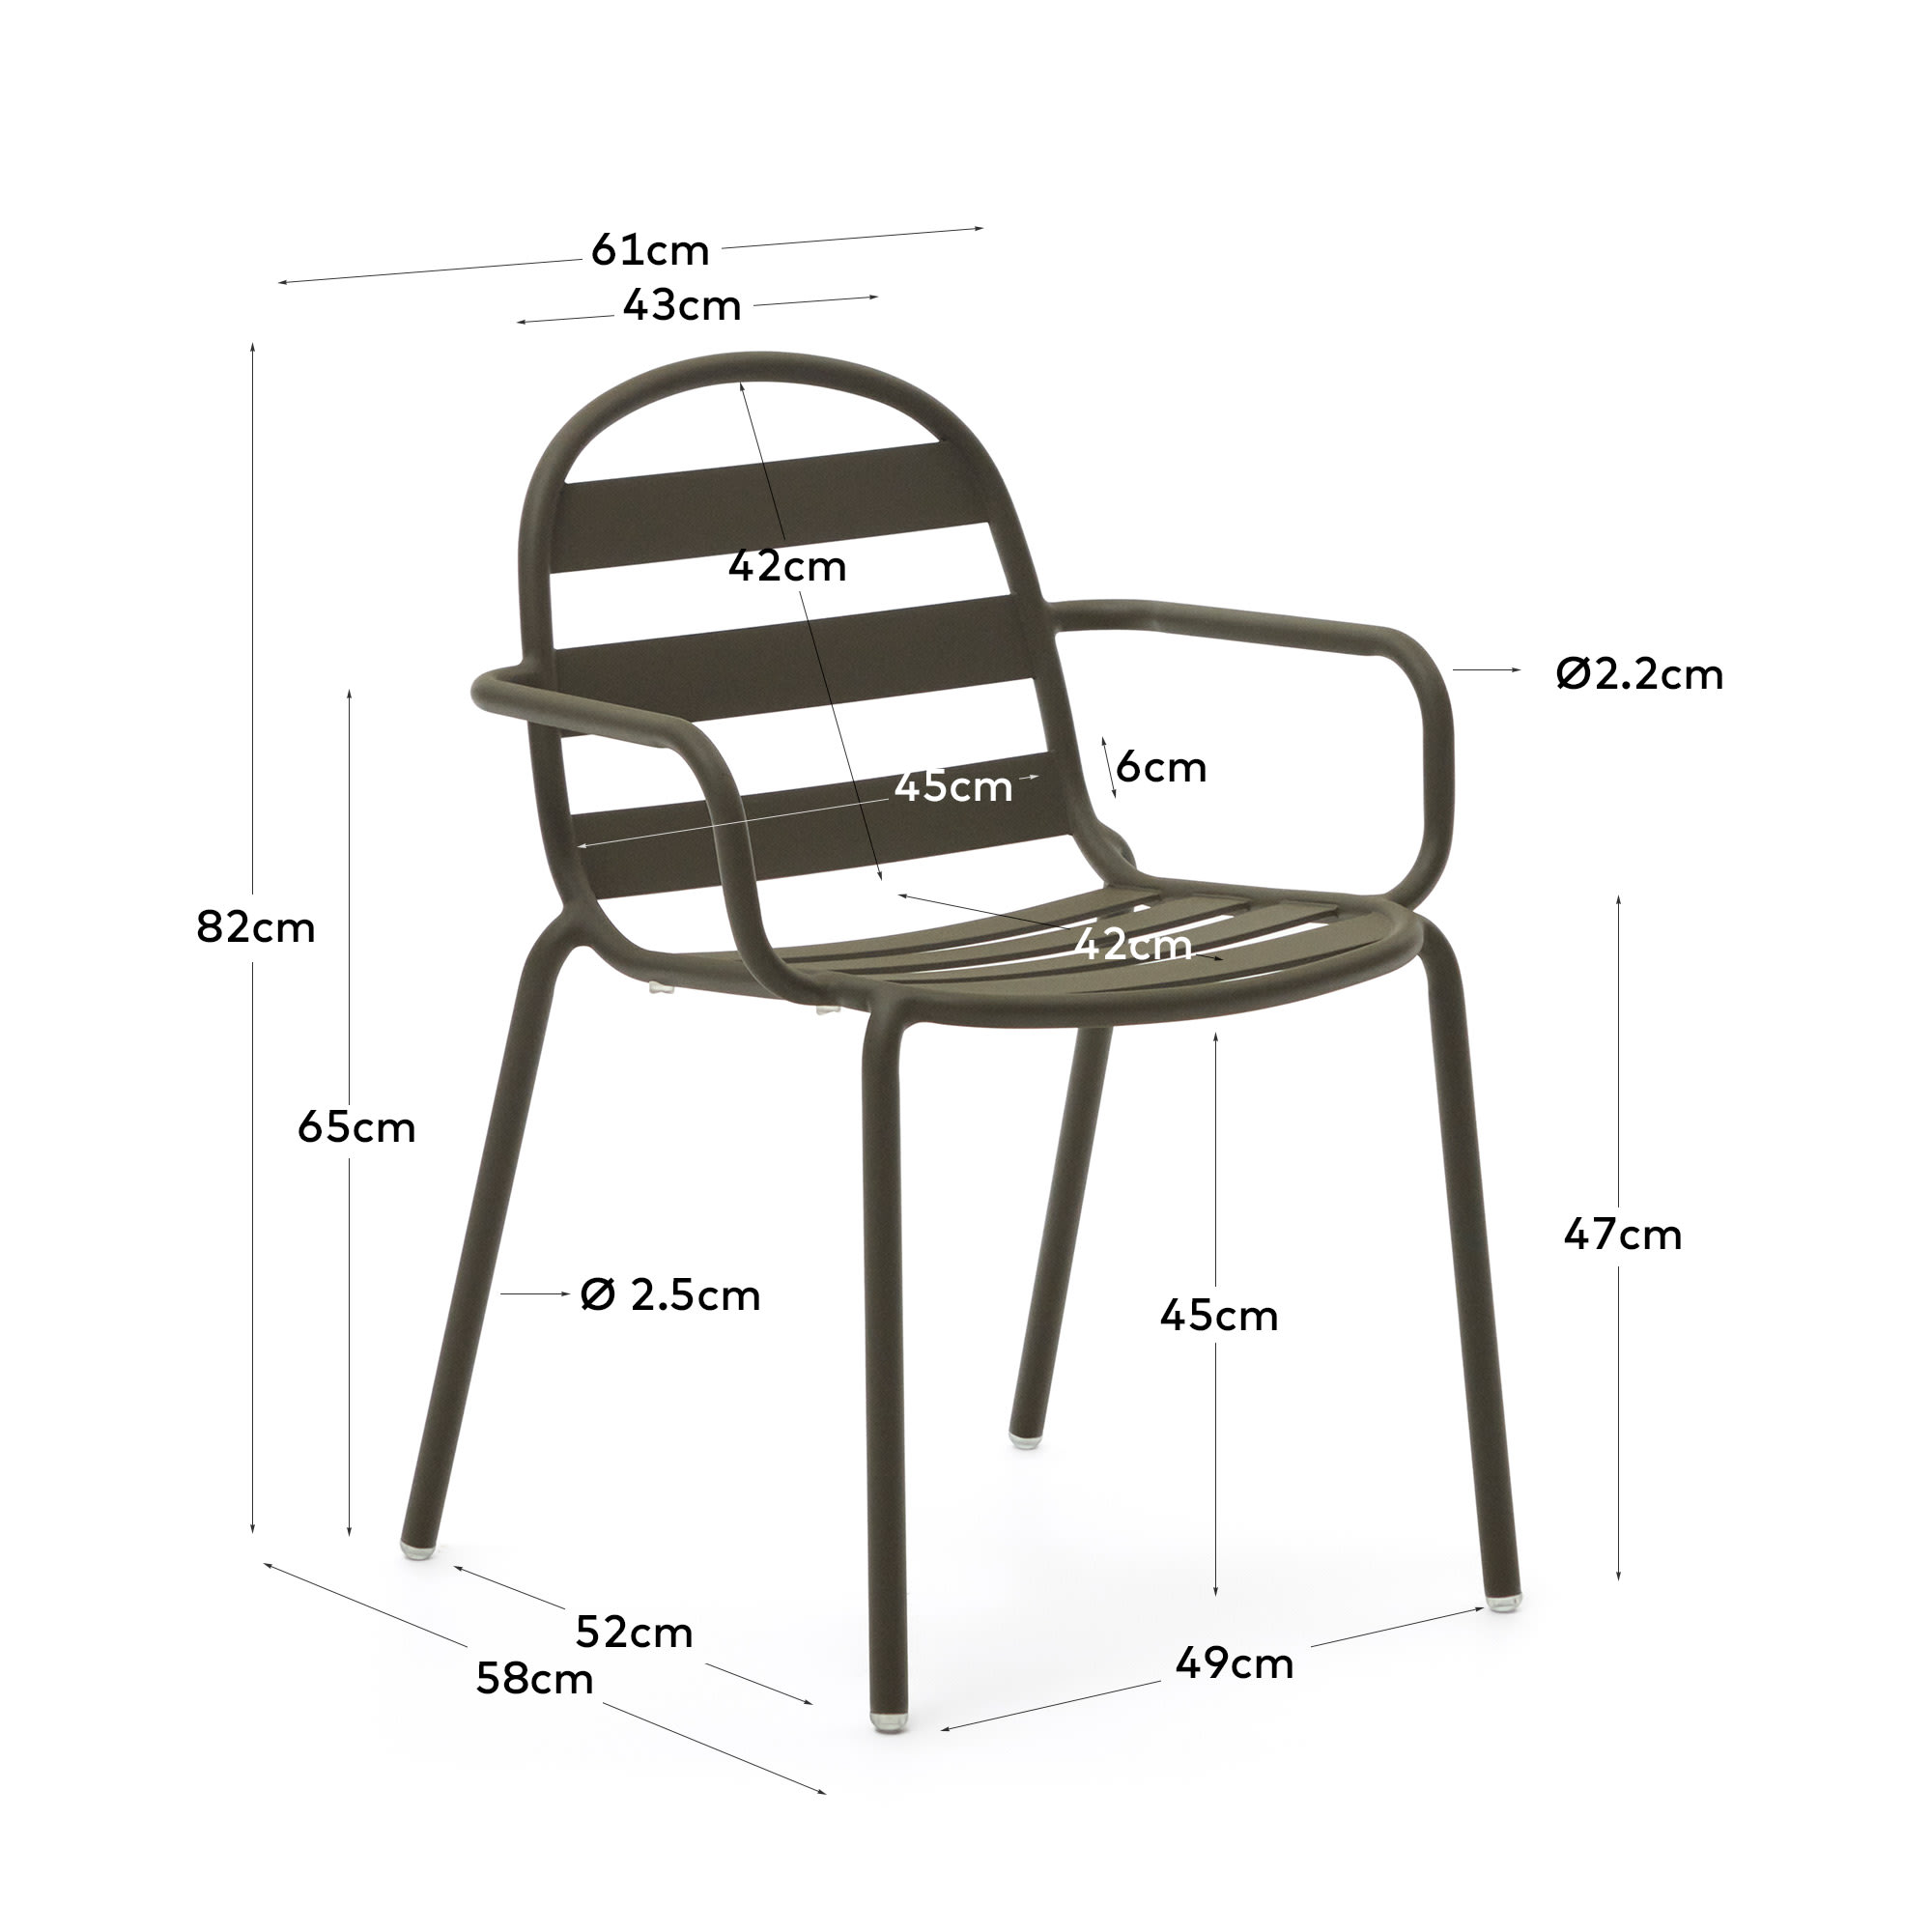 Joncols stackable outdoor aluminium chair with a powder coated green finish - sizes